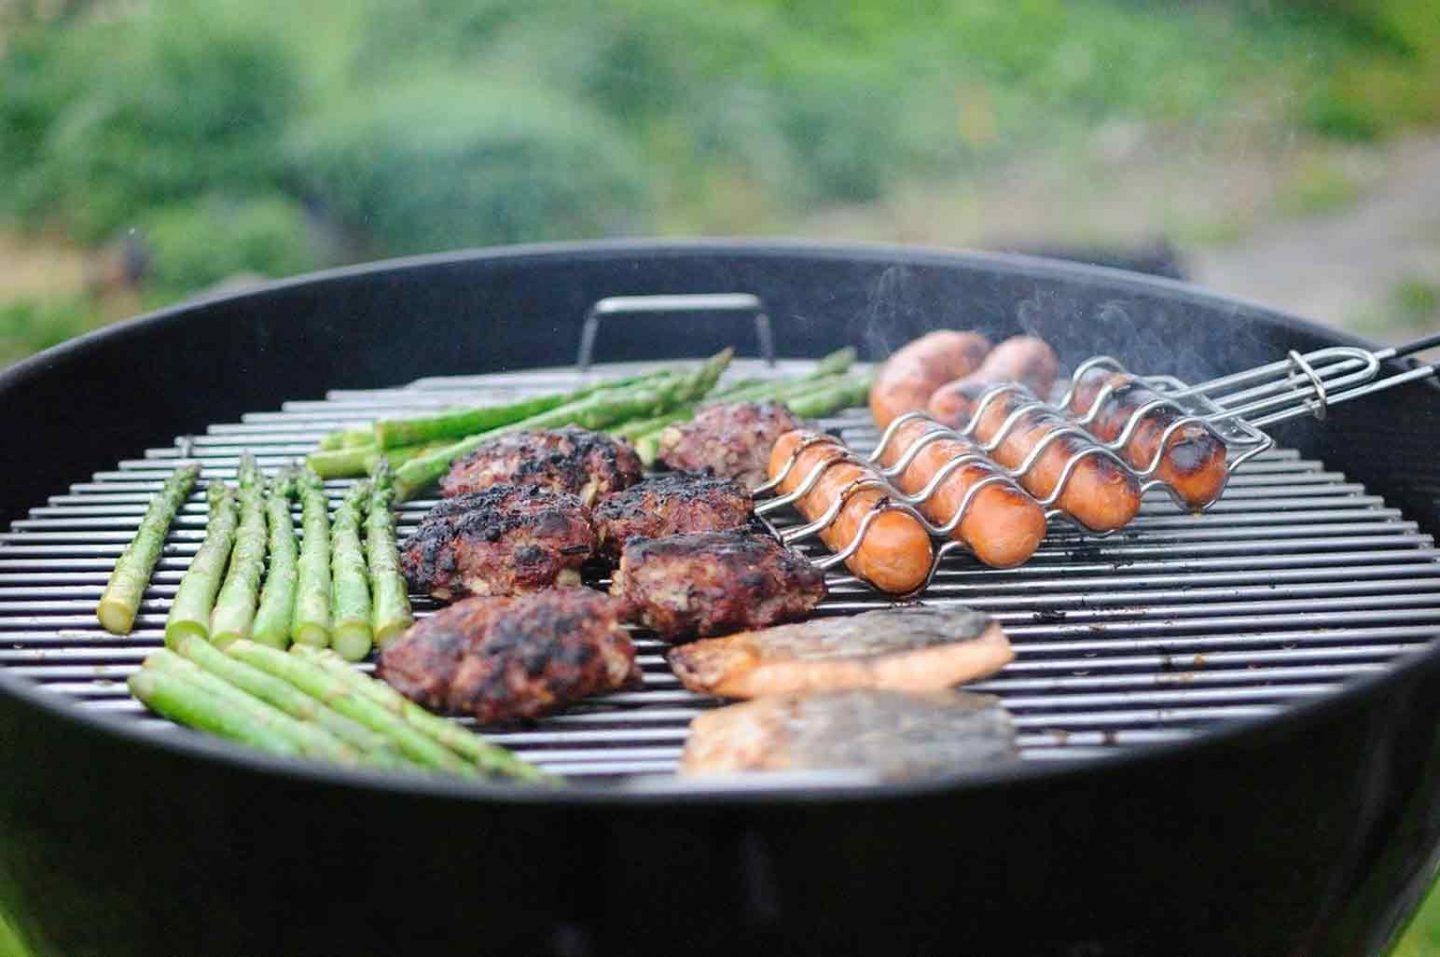 Tips for a backyard barbecue